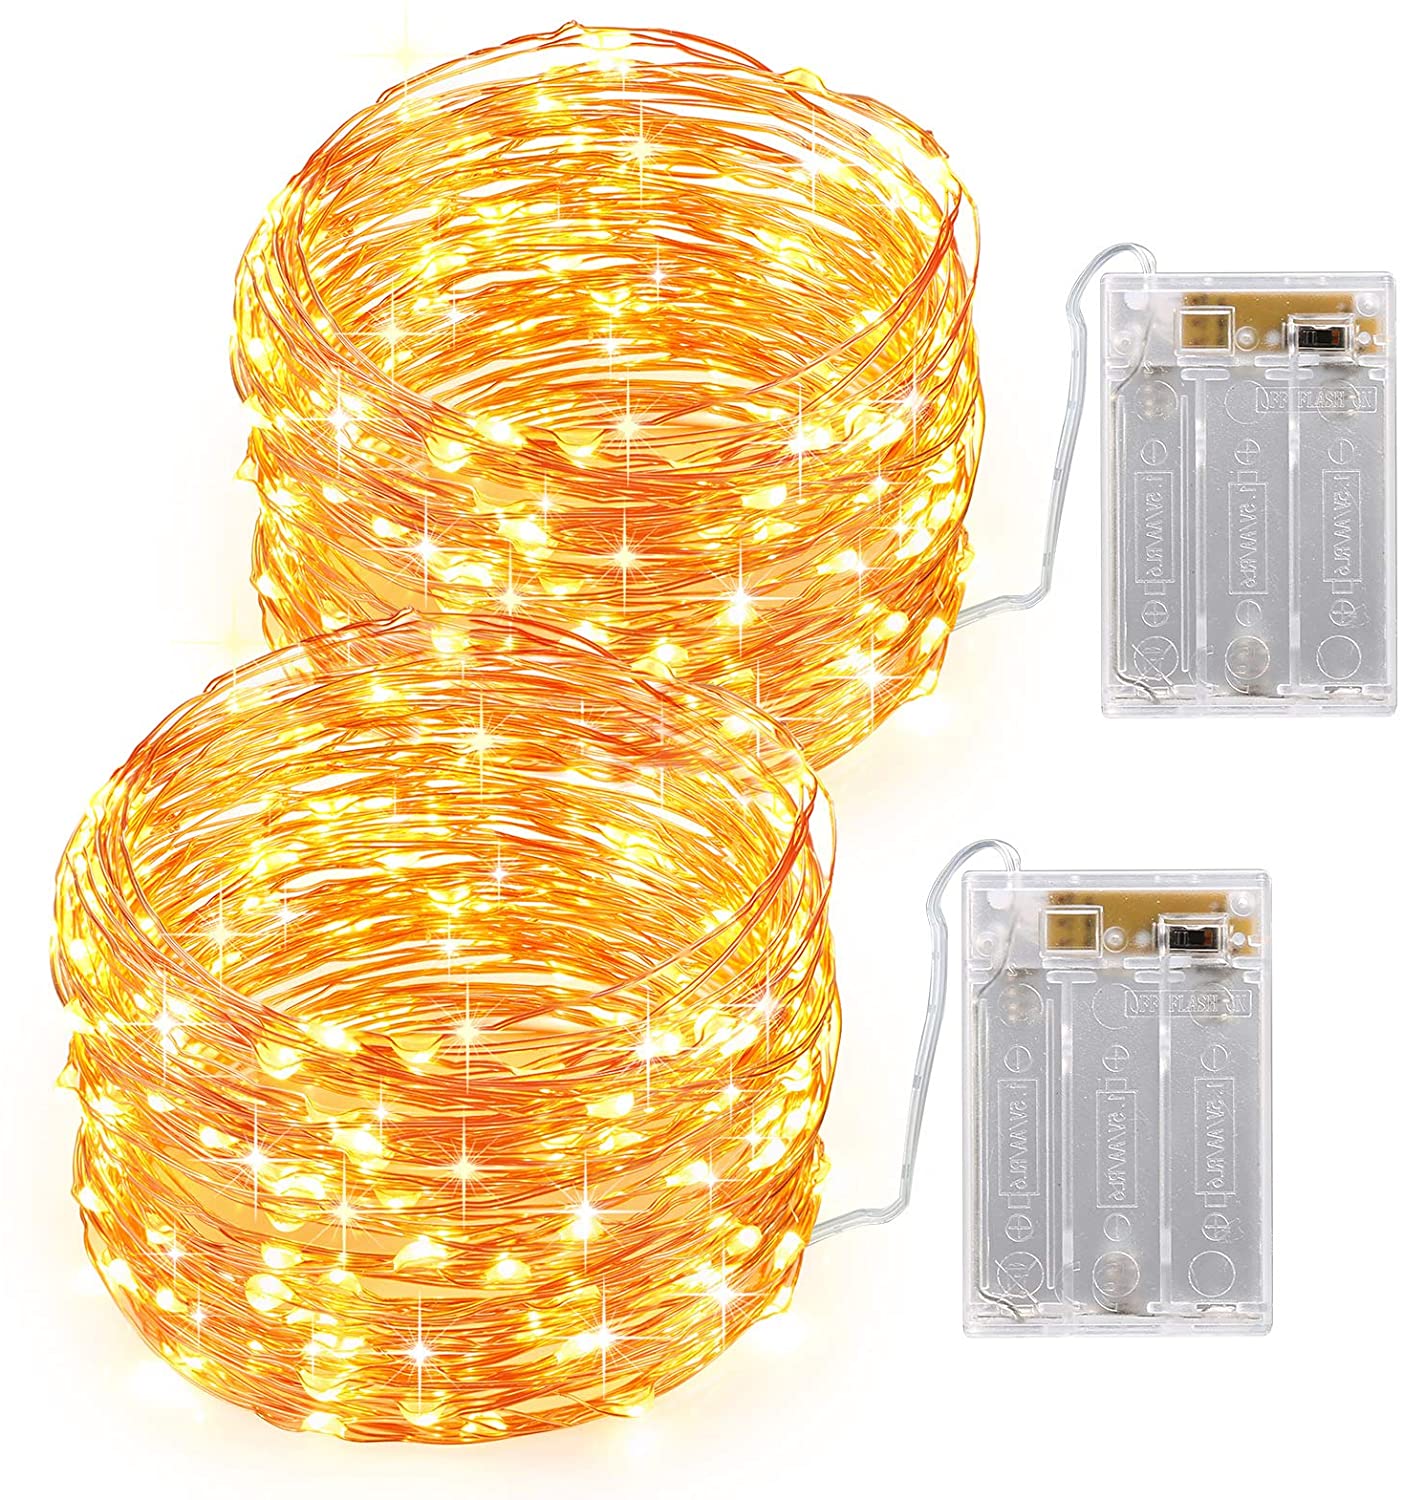 2 Modes Decoration Fairy String Lights, 100 LED 10M Mini Copper Wire Starry Lights Battery Powered.  (NC)